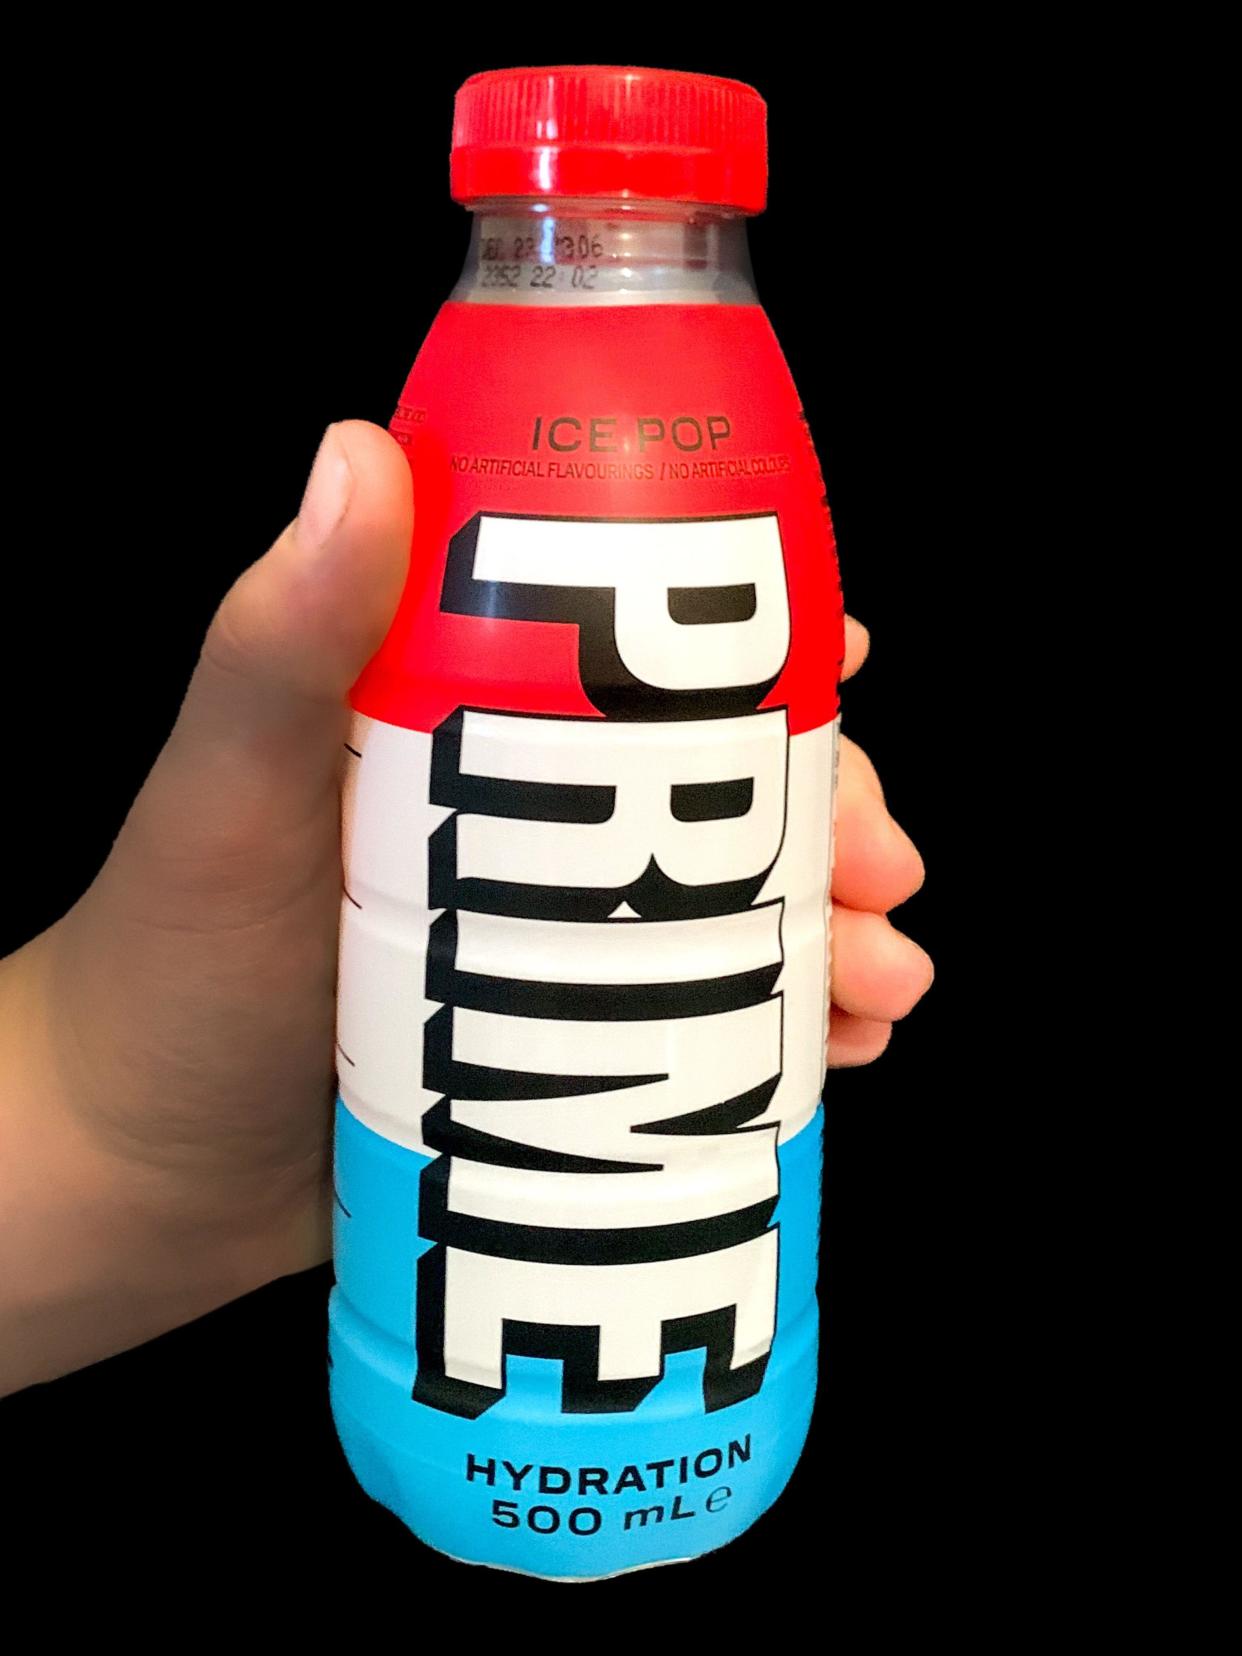 Prime hydration drink by KSI and Logan Paul is reportedly selling for up to £100 a bottle. (PA)